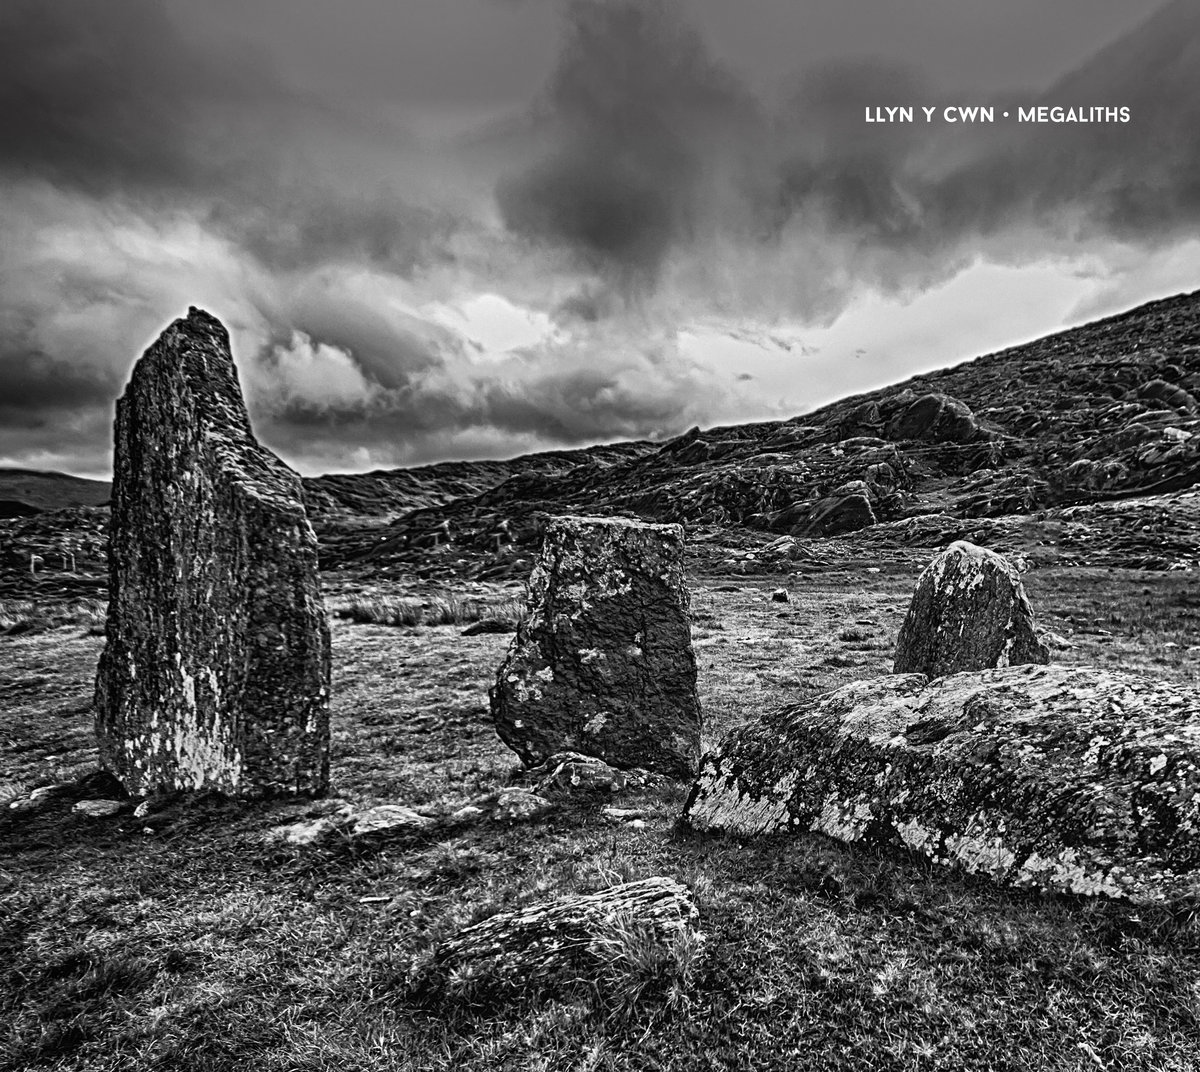 Marking season for academics (though it never stops) so needing suitable ambient listening. This from @mankyben aka Llyn y Cwn will do nicely... drones hewn from ancient stones.